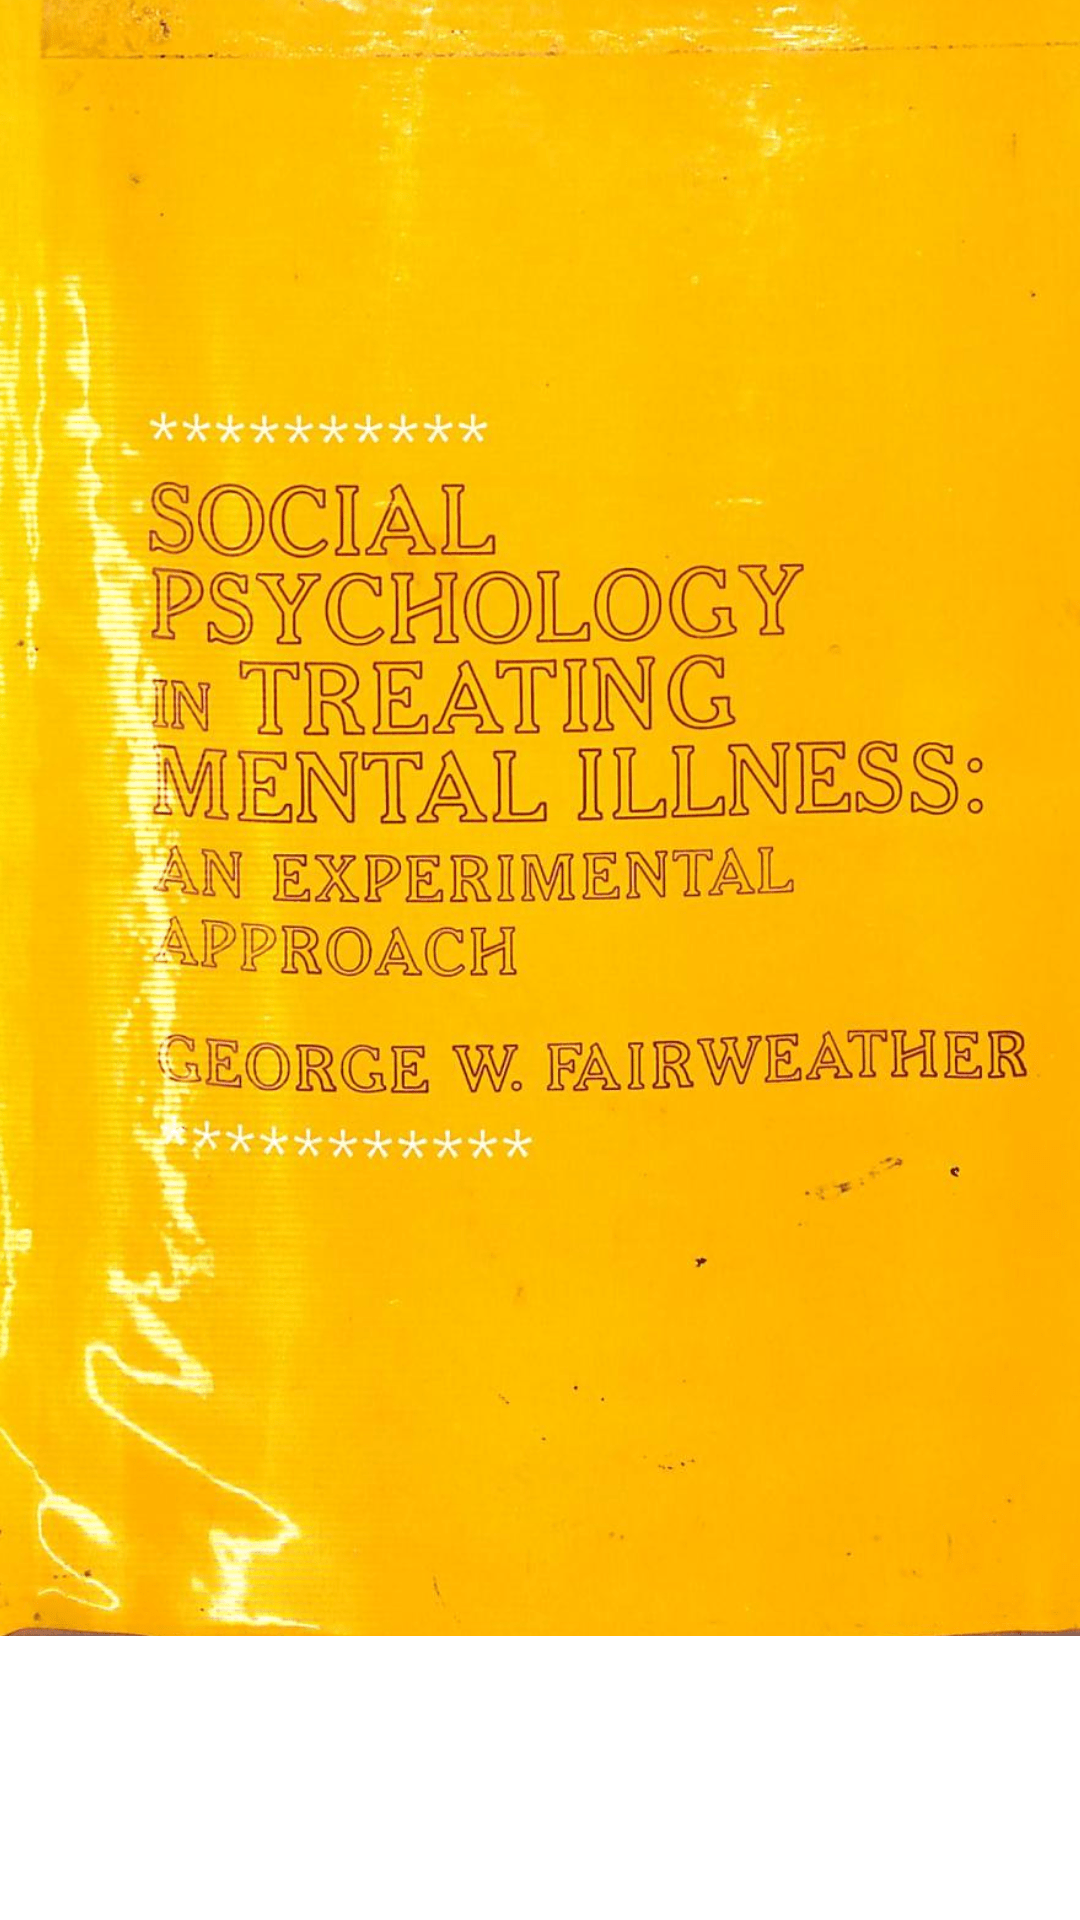 Social Psychology in Treating Mental illness: An experimental Approach